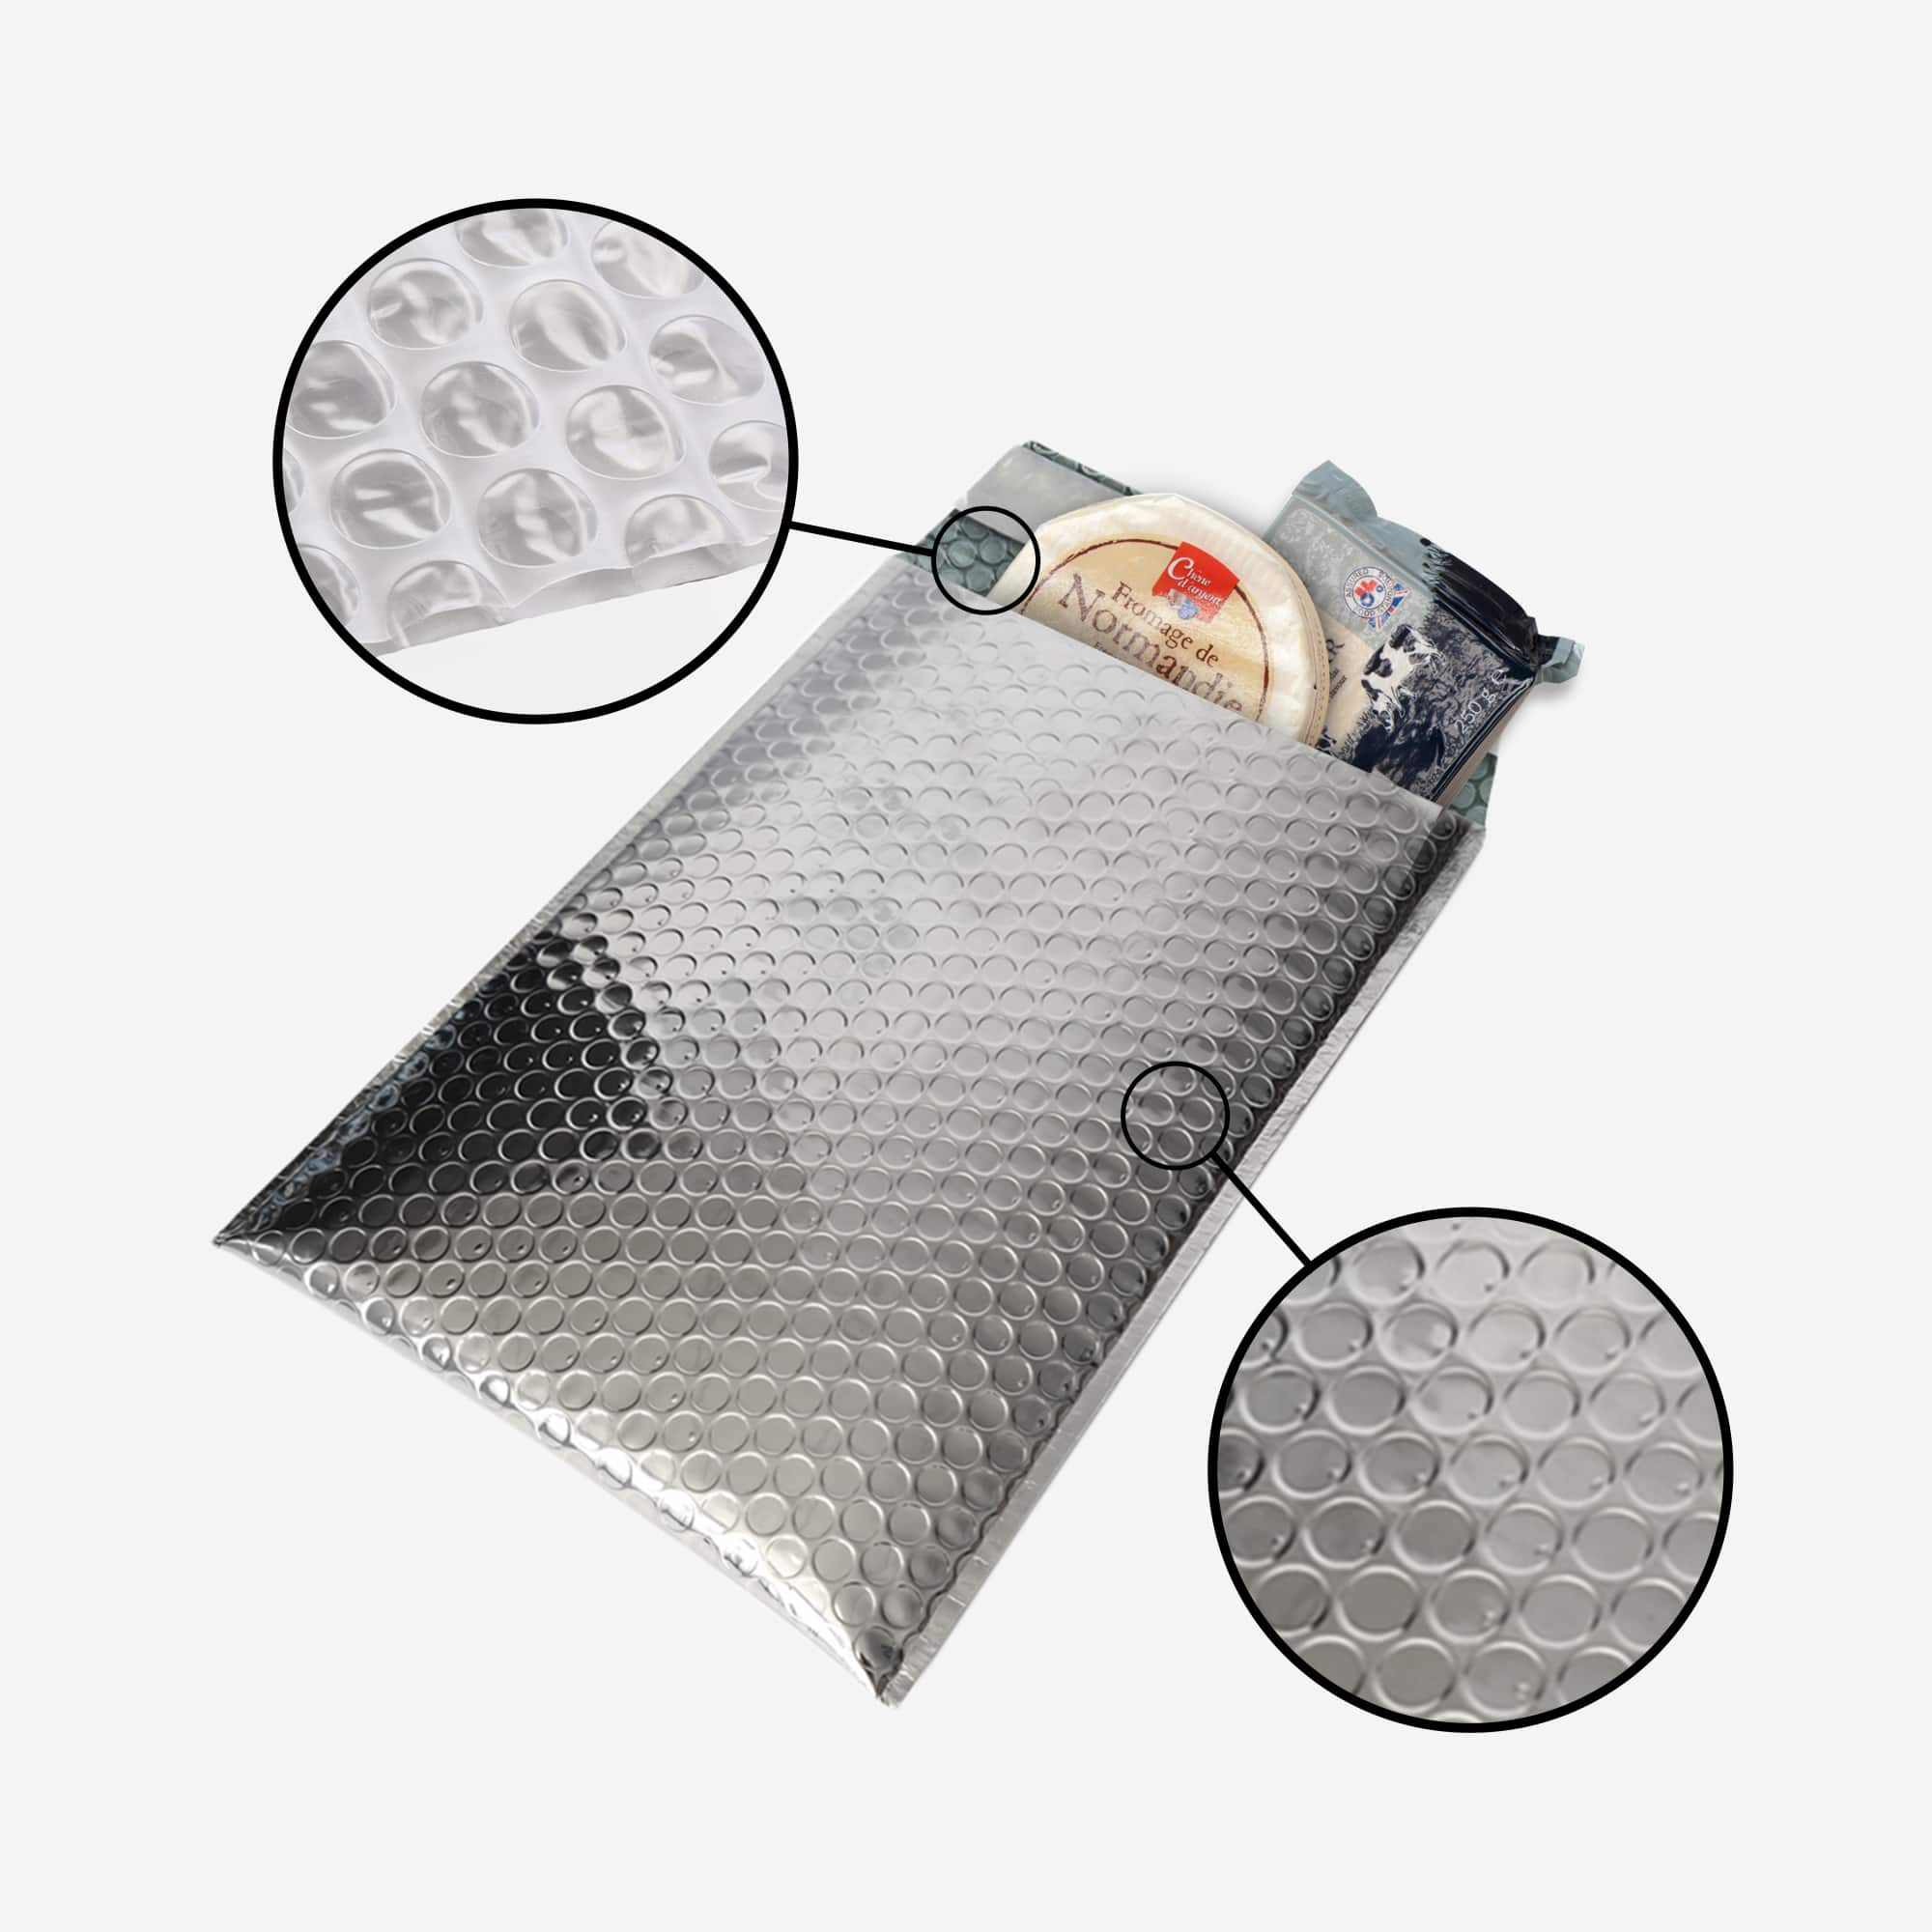 Thermal reflective insulated cold shield bubble mailer 8 x 11 inches, 100 pcs per case